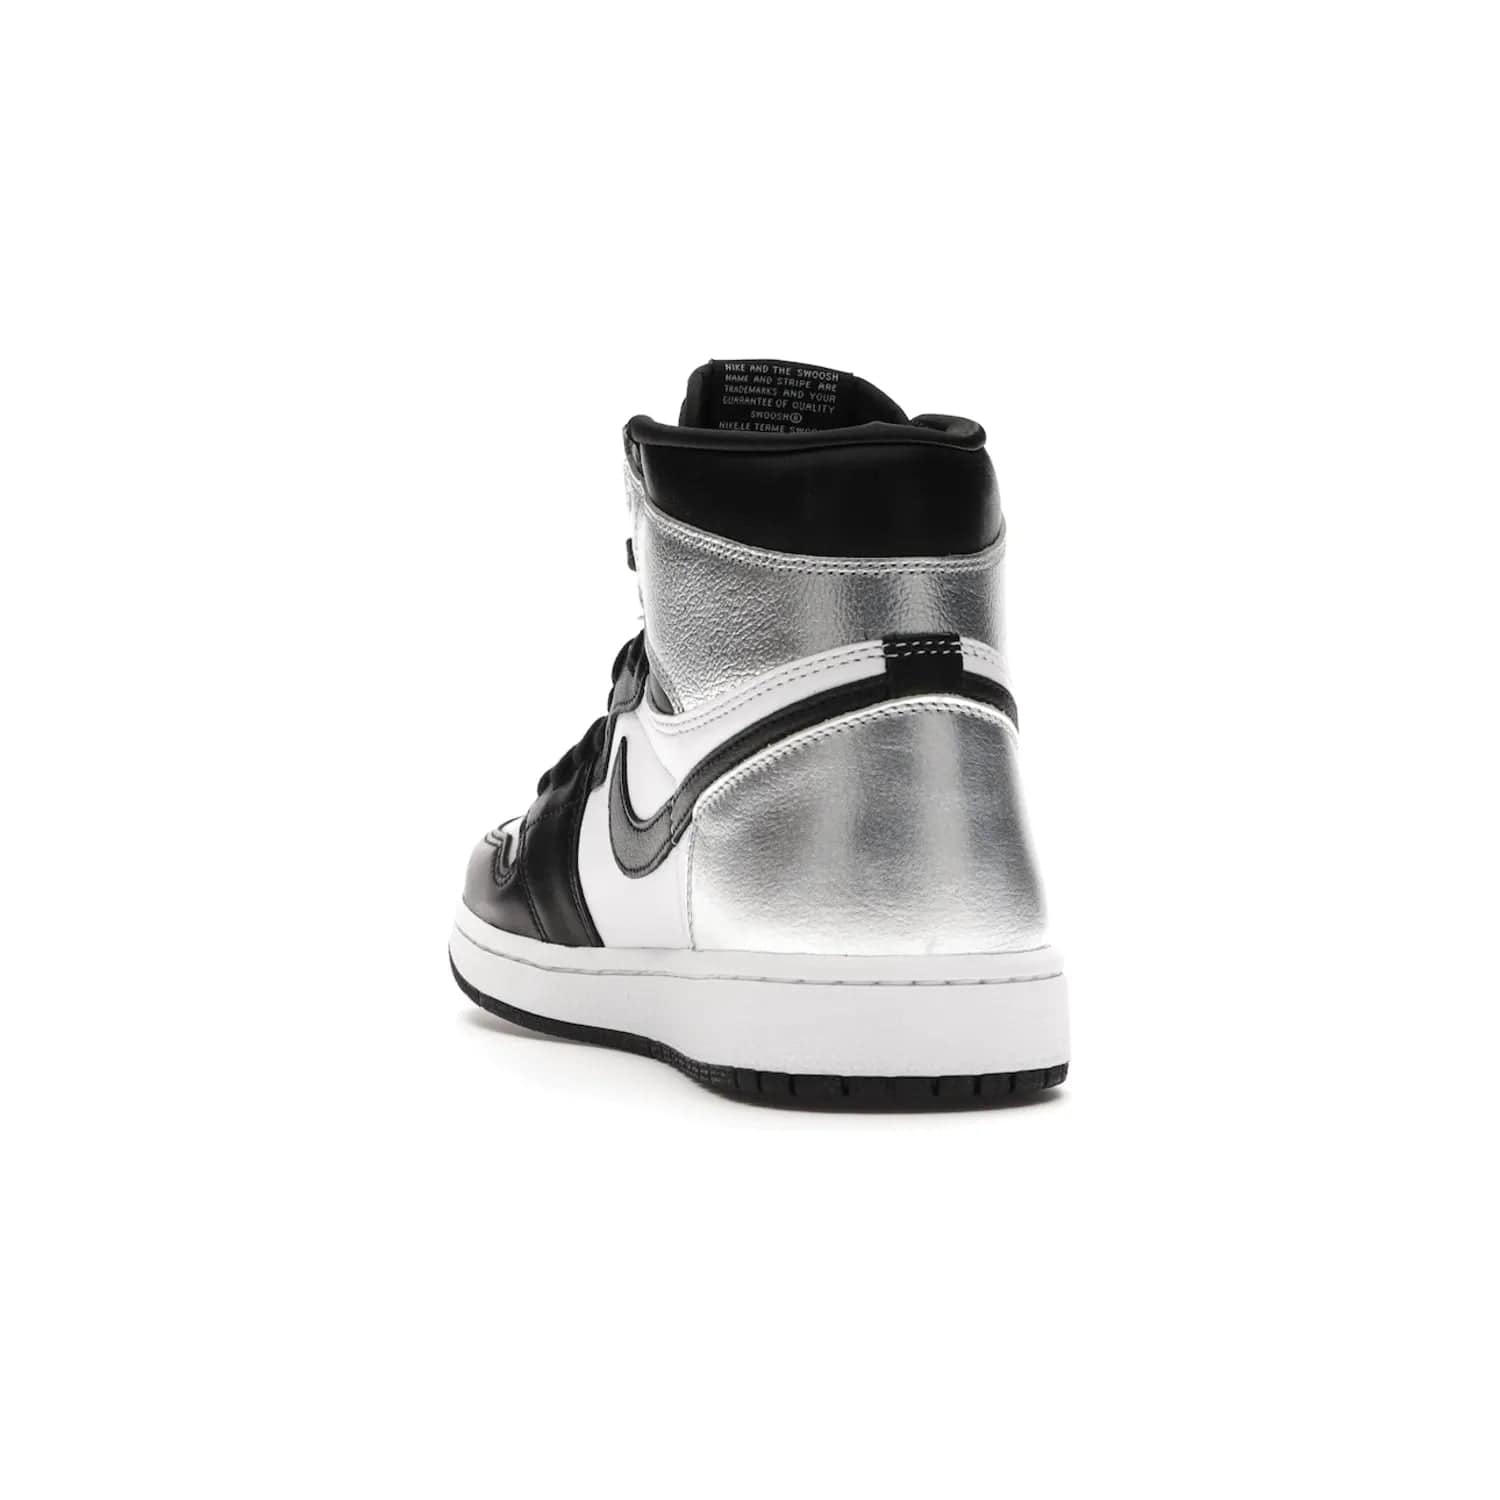 Jordan 1 Retro High Silver Toe (Women's) - Image 26 - Only at www.BallersClubKickz.com - Introducing the Jordan 1 Retro High Silver Toe (Women's): an updated spin on the iconic 'Black Toe' theme. Featuring white & black leather and silver patent leather construction. Nike Air branding, Air Jordan Wings logo, and white/black sole finish give a classic look. The perfect addition to an on-trend streetwear look. Available in classic black & white, this Jordan 1 is an instant classic. Released in February 20